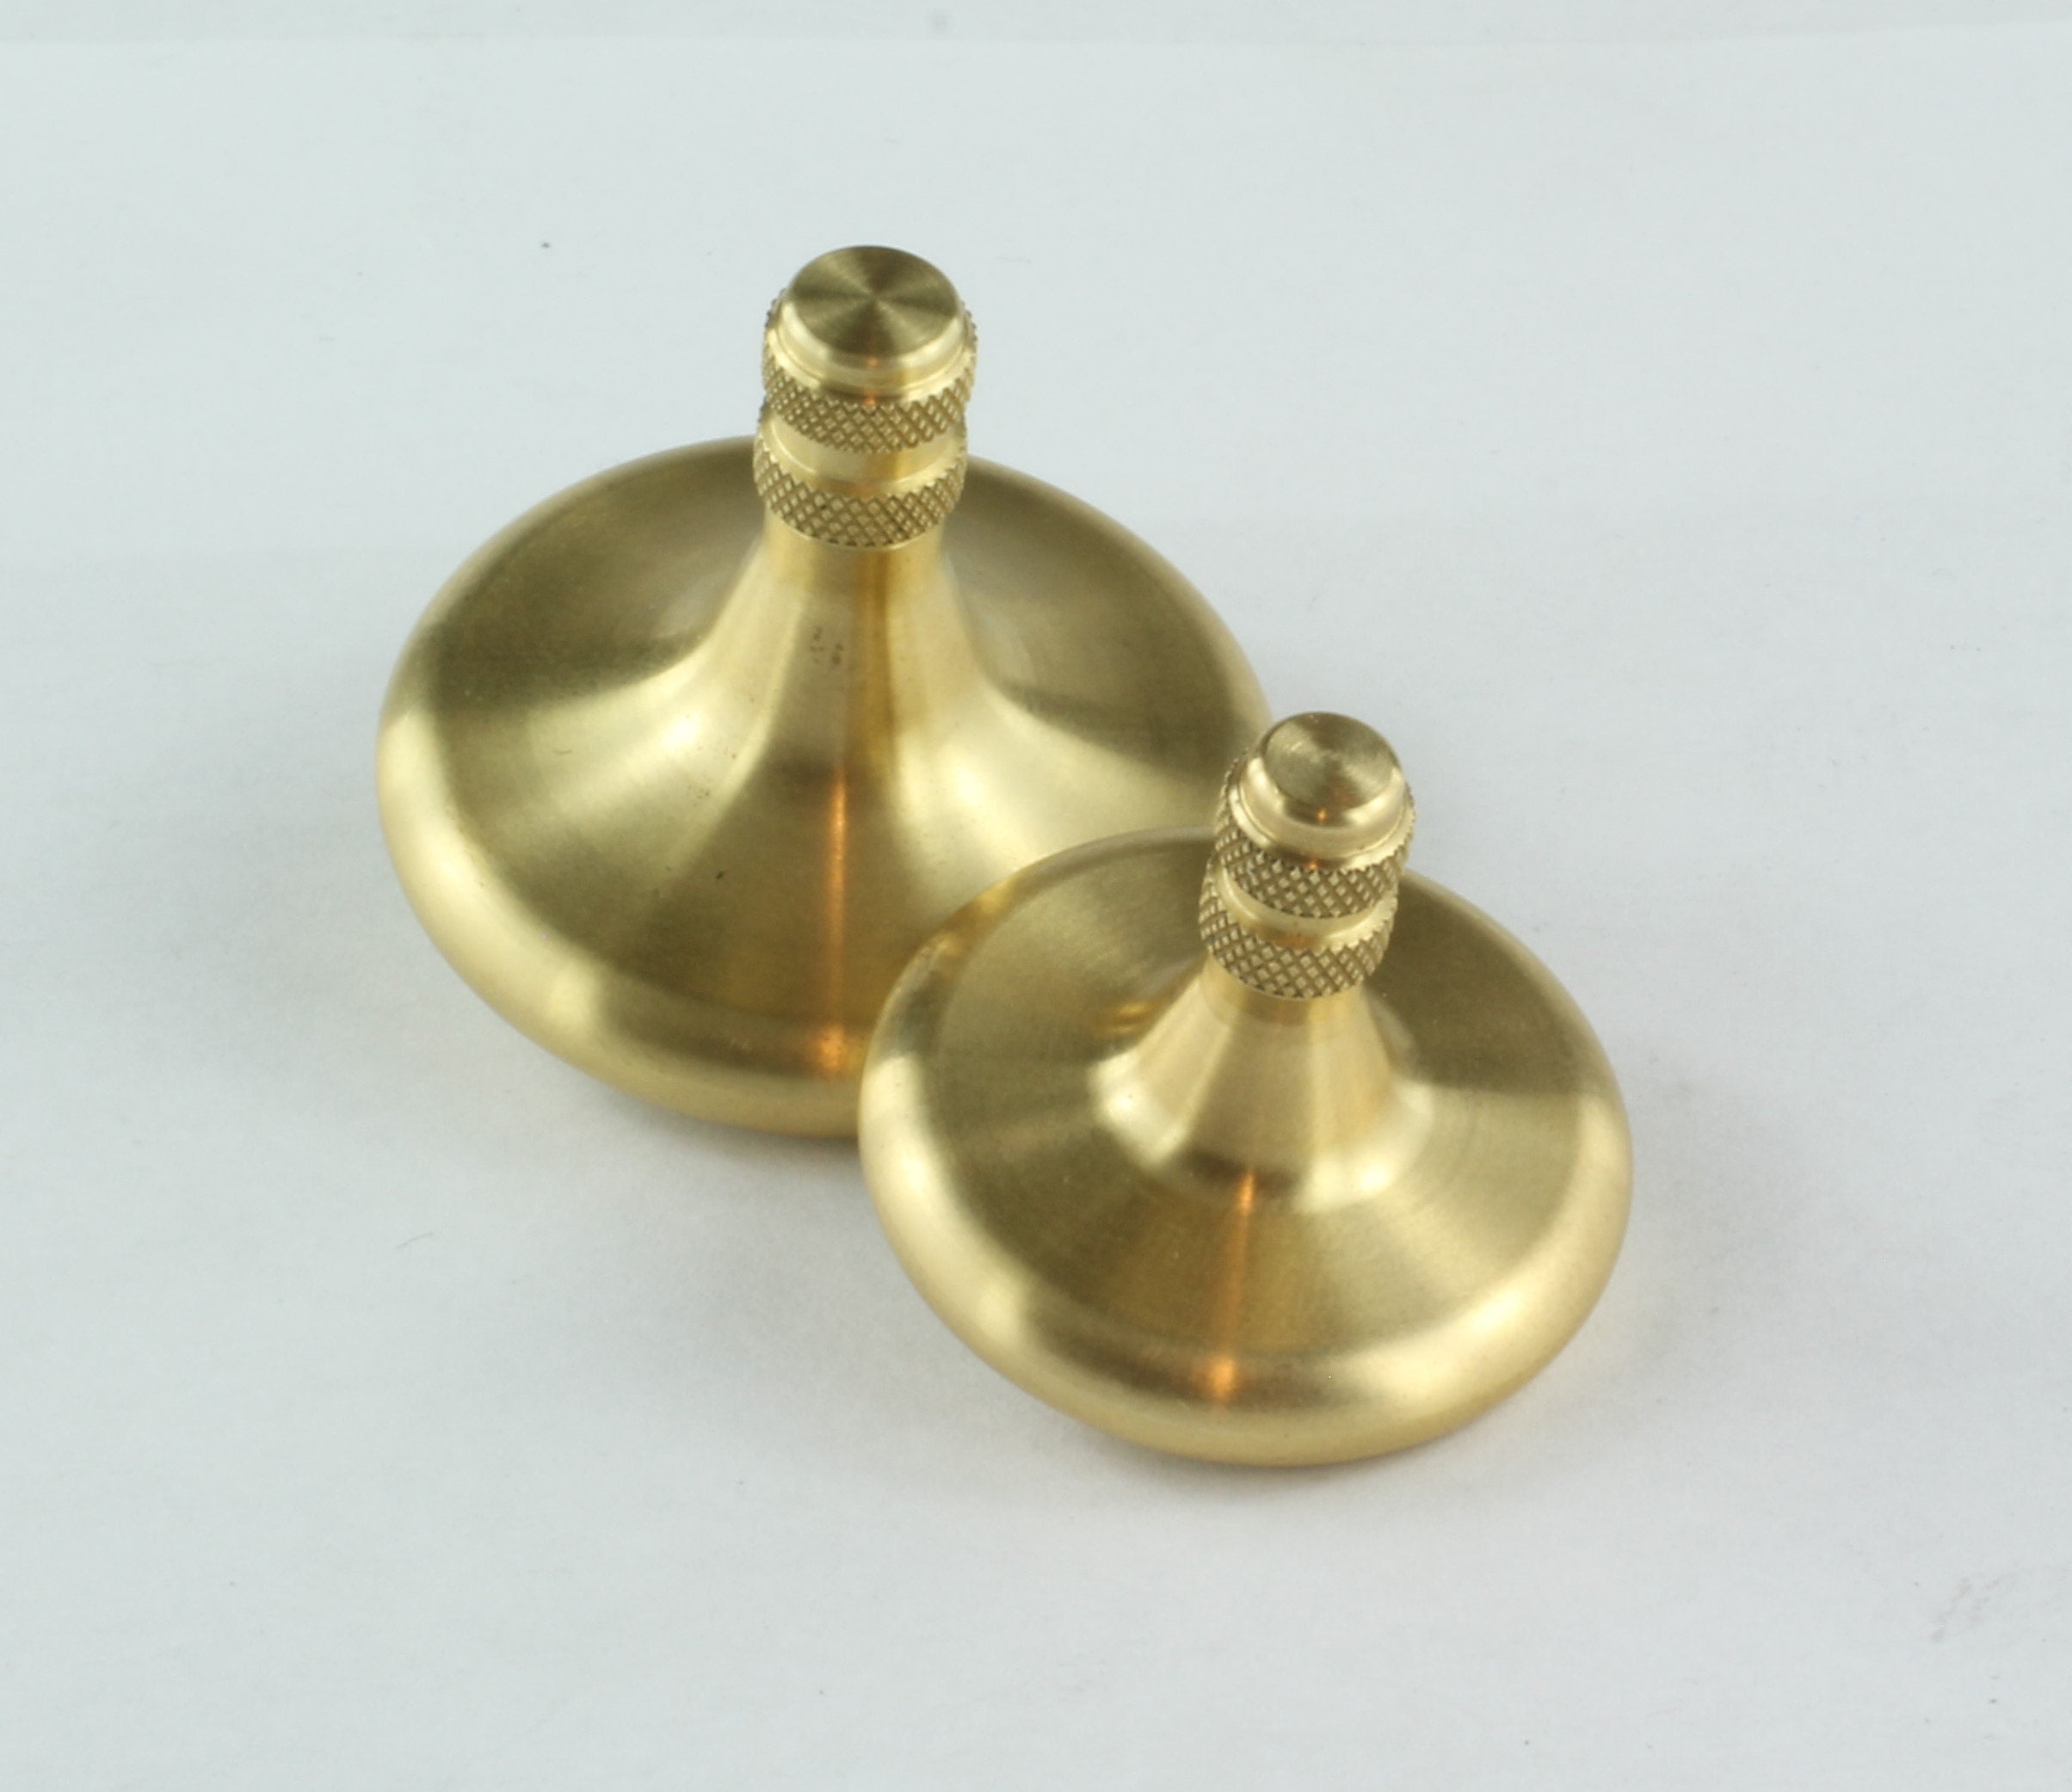 Set of Brass Spinning tops with Jatoba wood stand (Focus 125 and Focus 10)